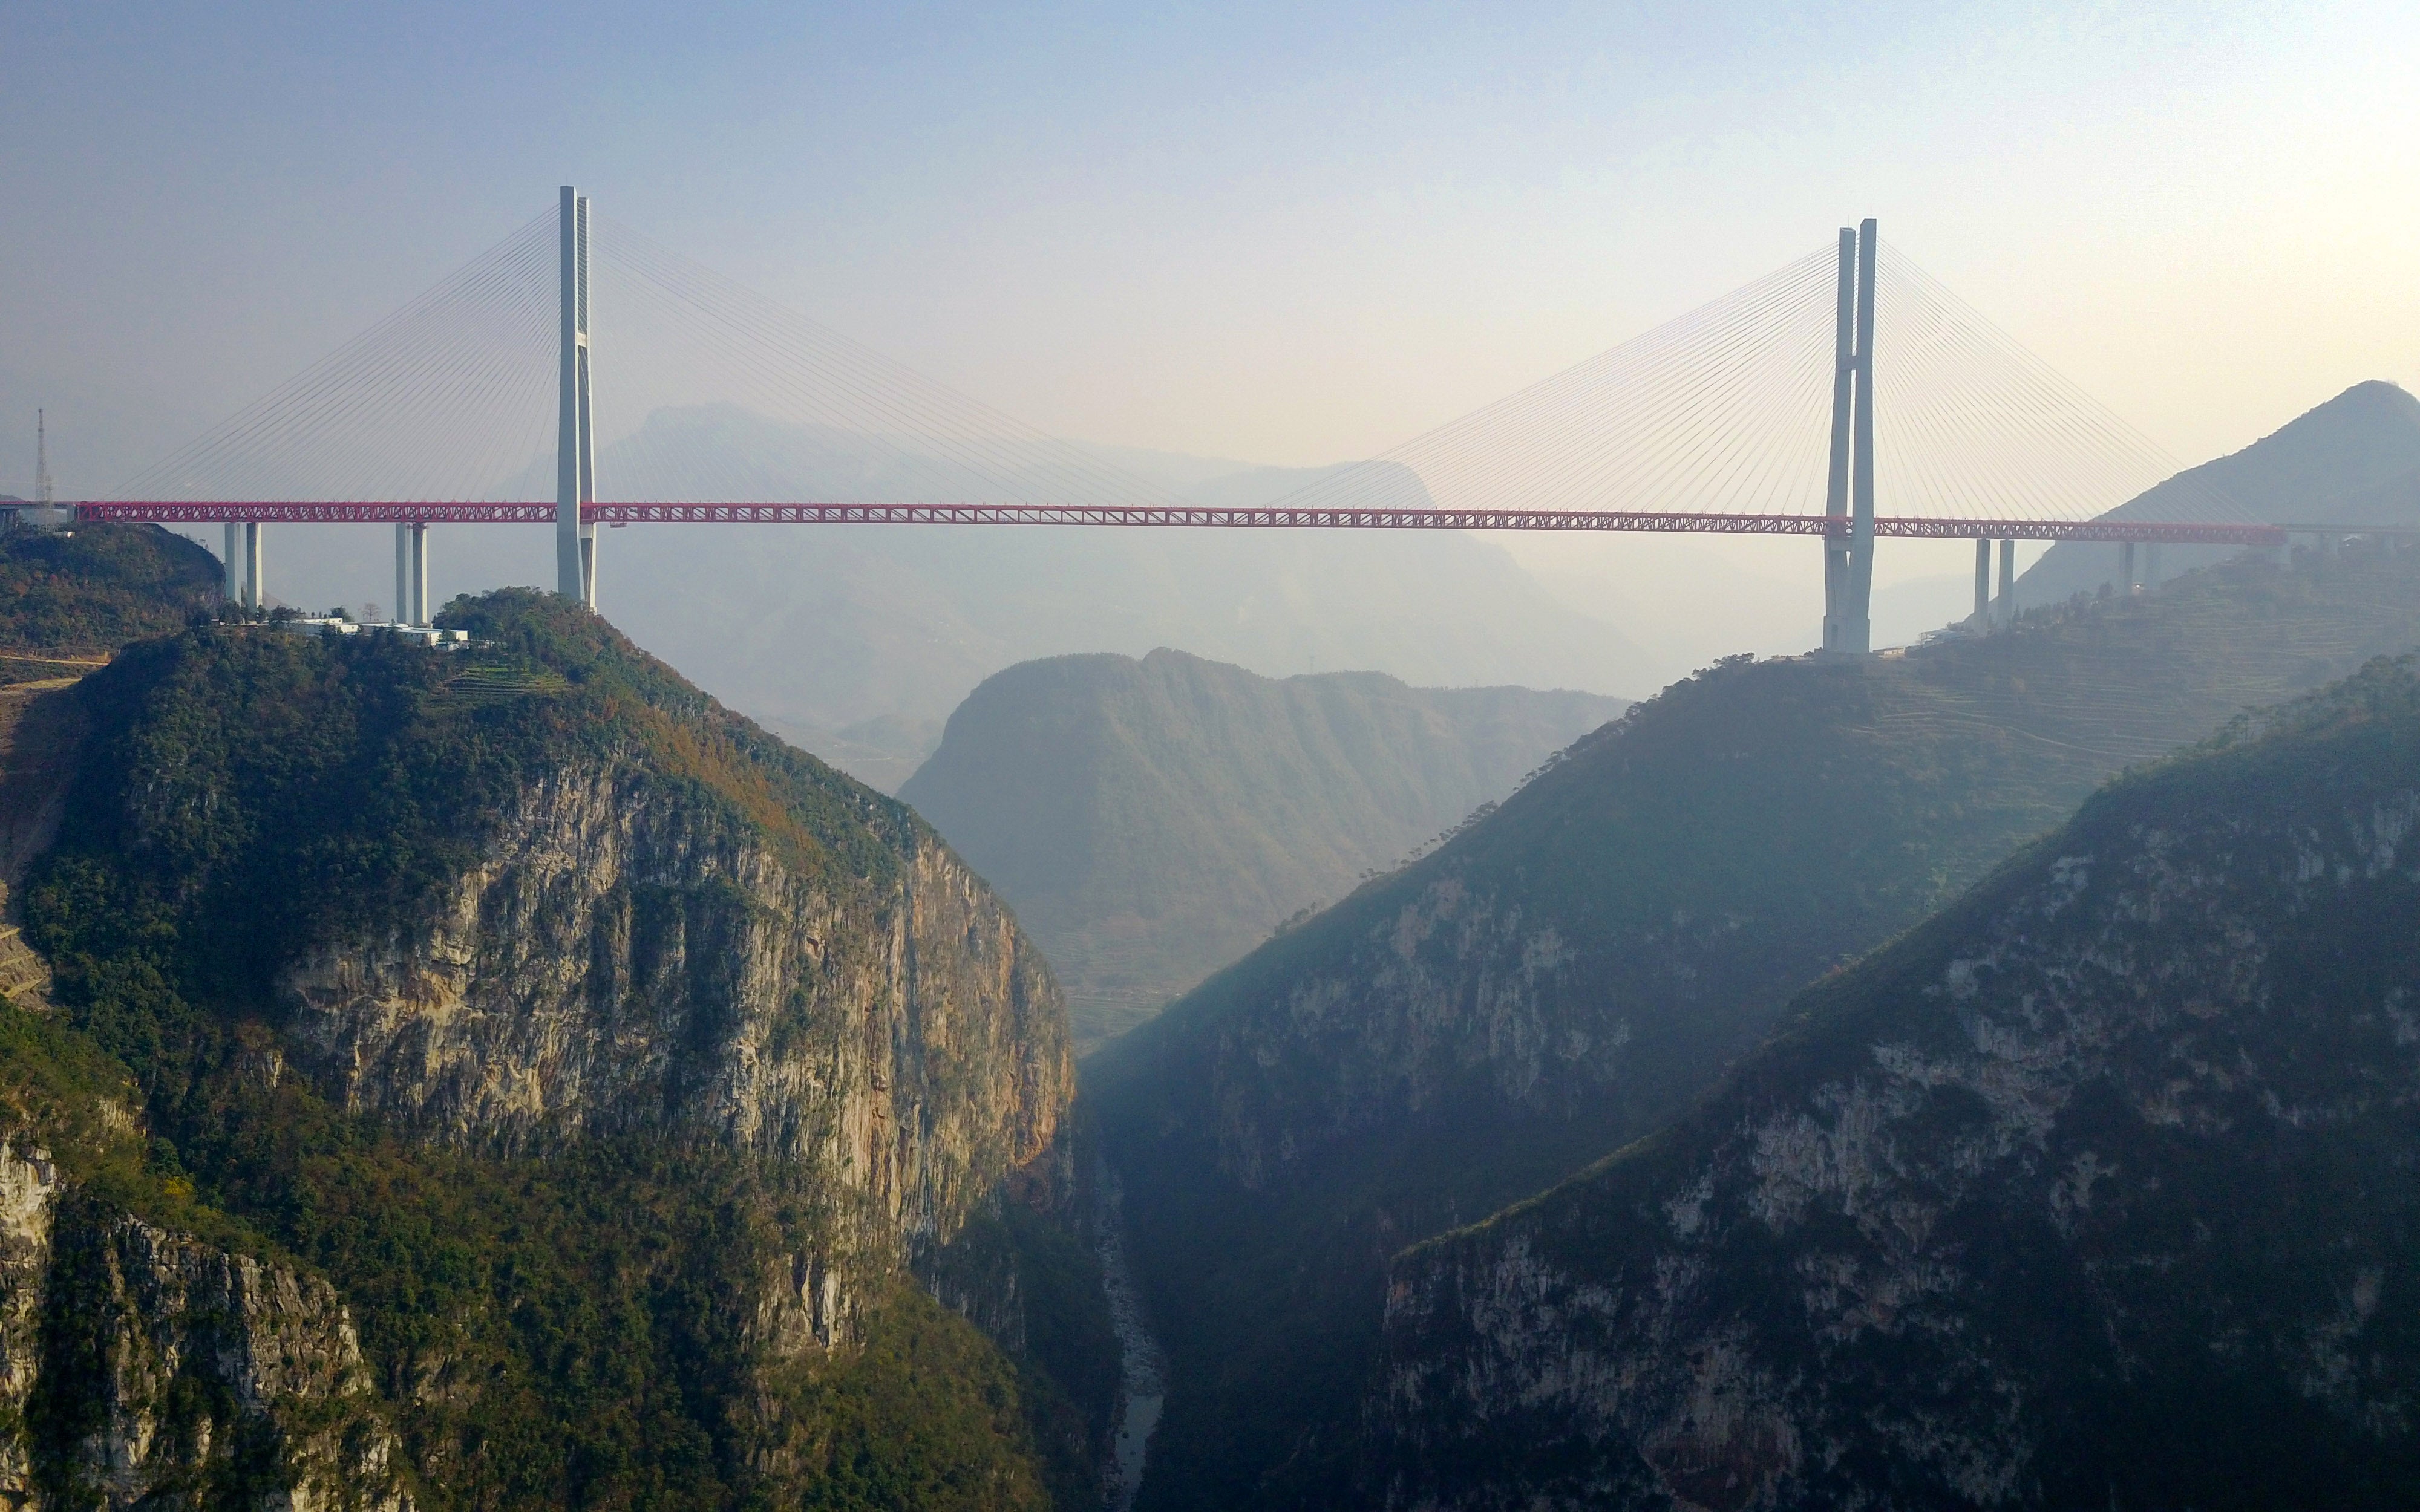 The Beipanjiang or Duge Bridge is the highest in the world